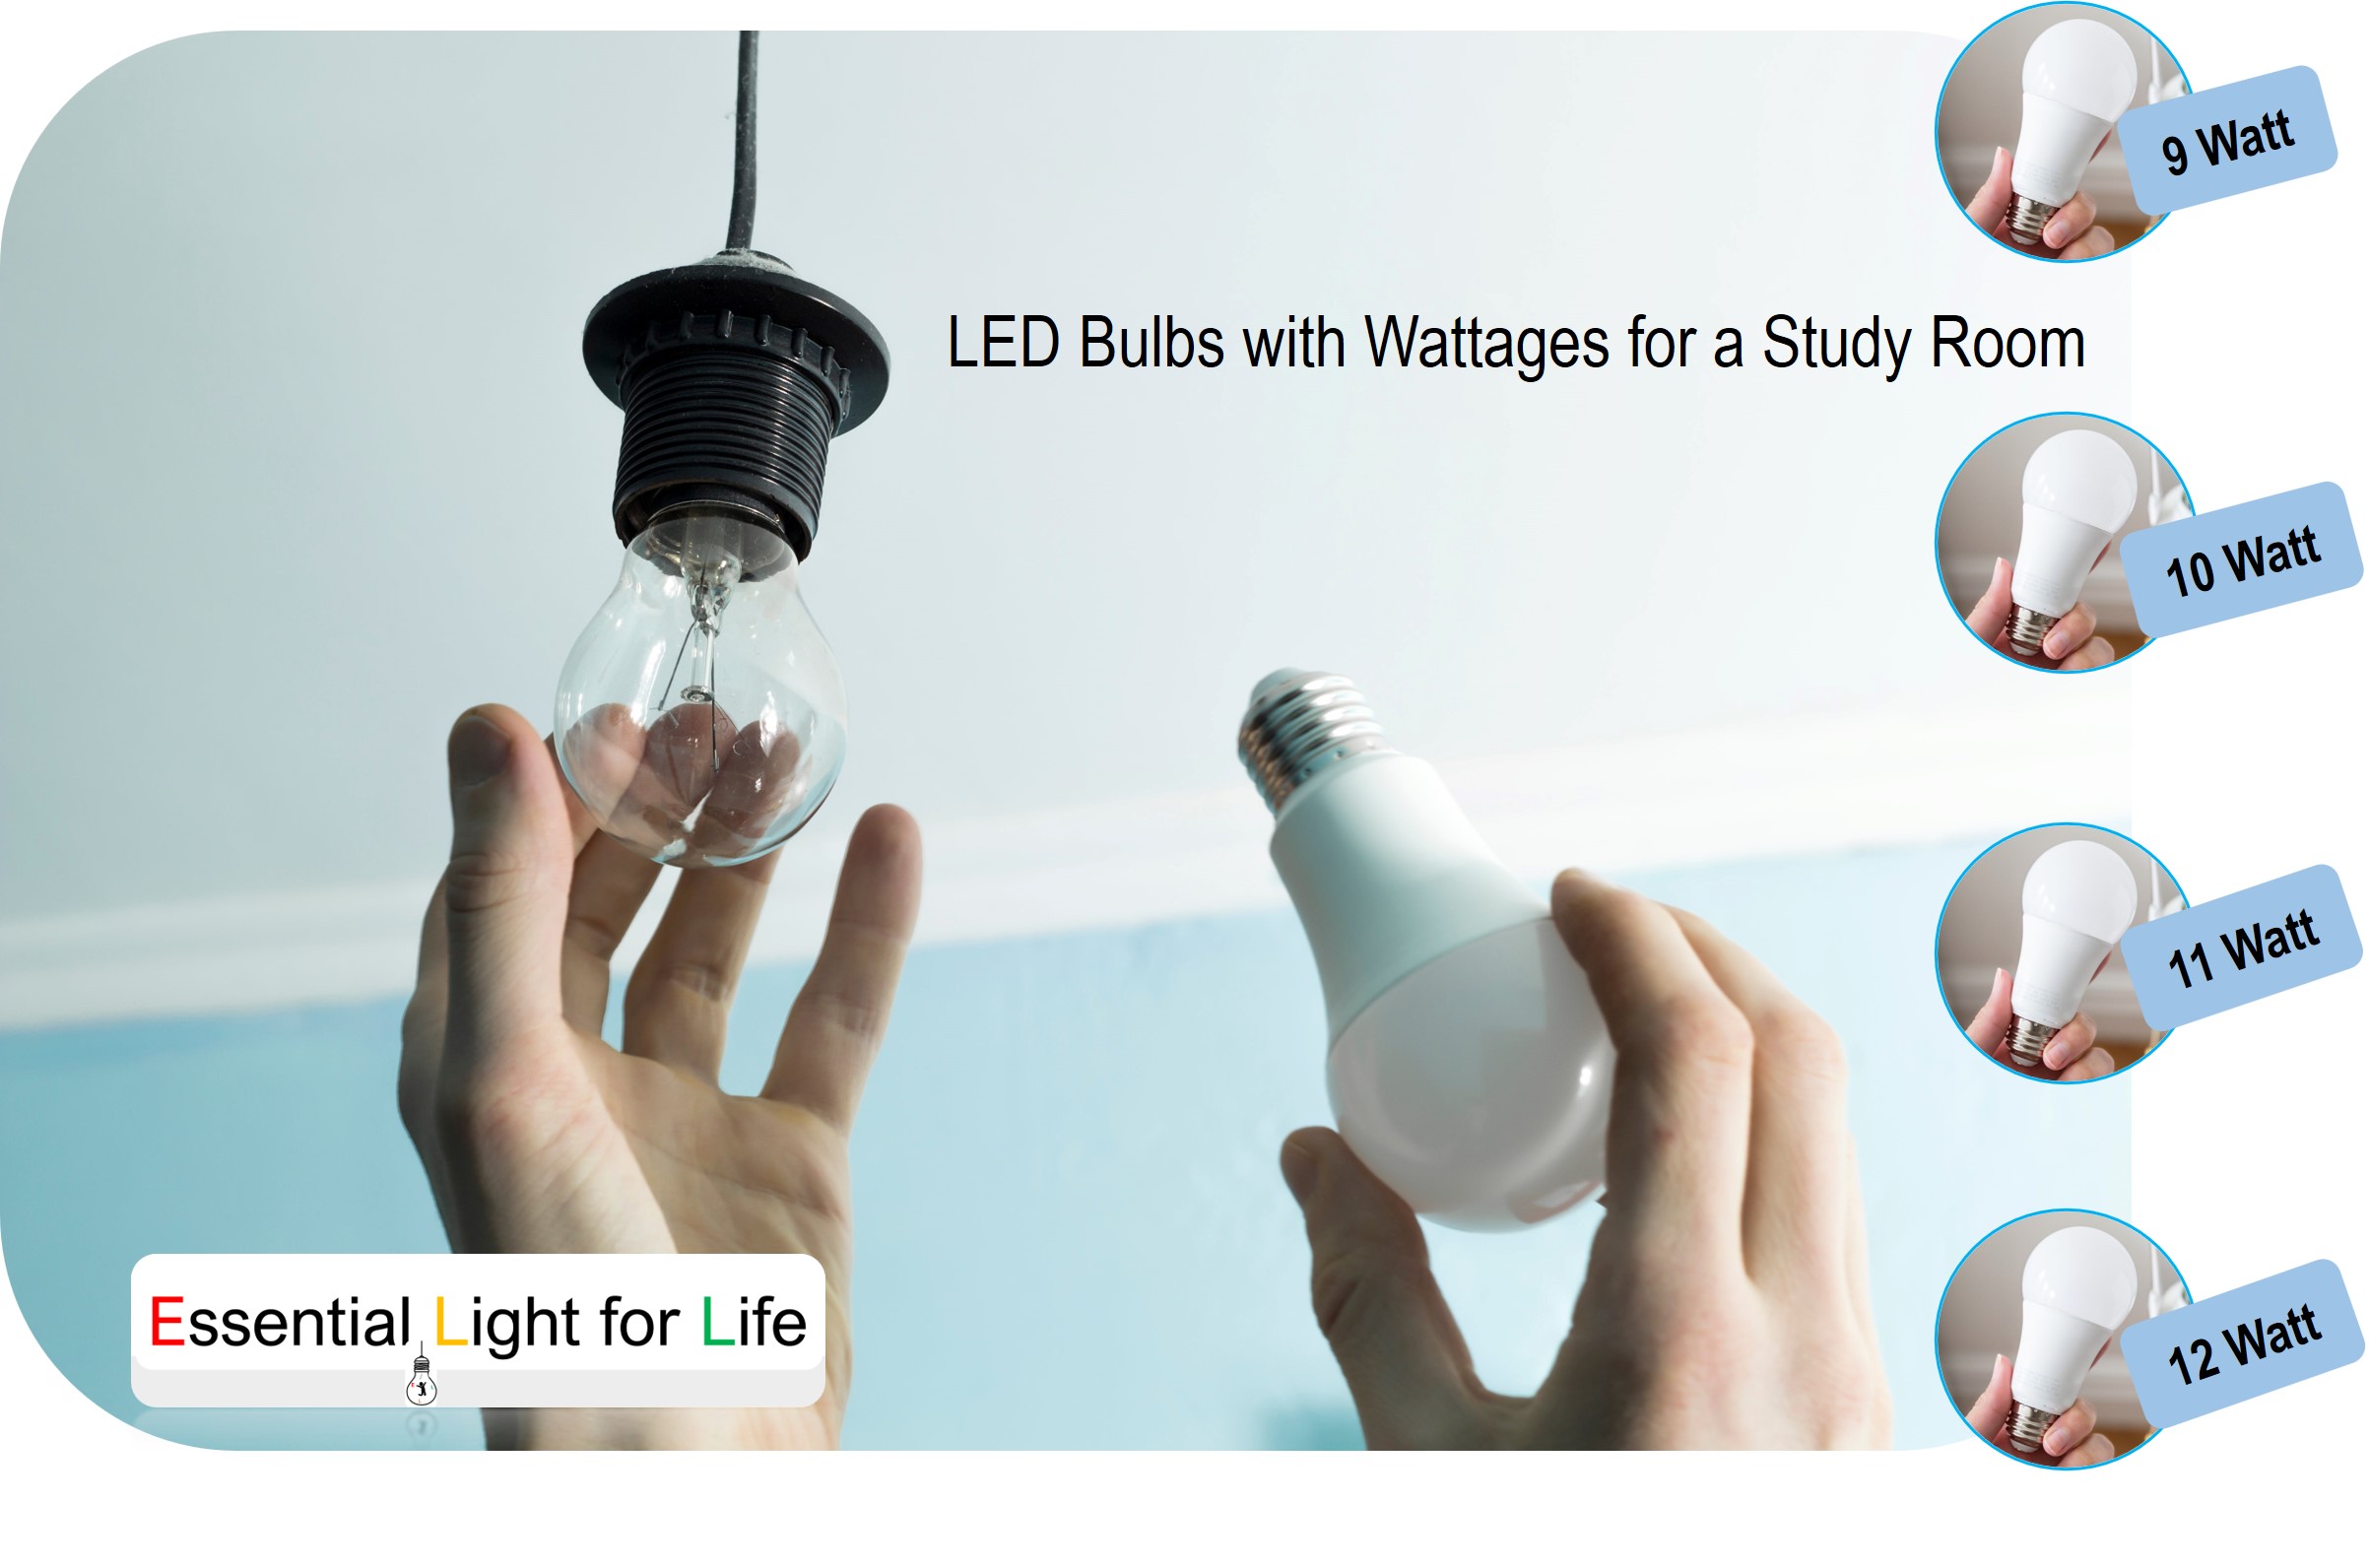 Illuminating Success: Finding the Best LED Bulbs for Your Study Room and Lamp